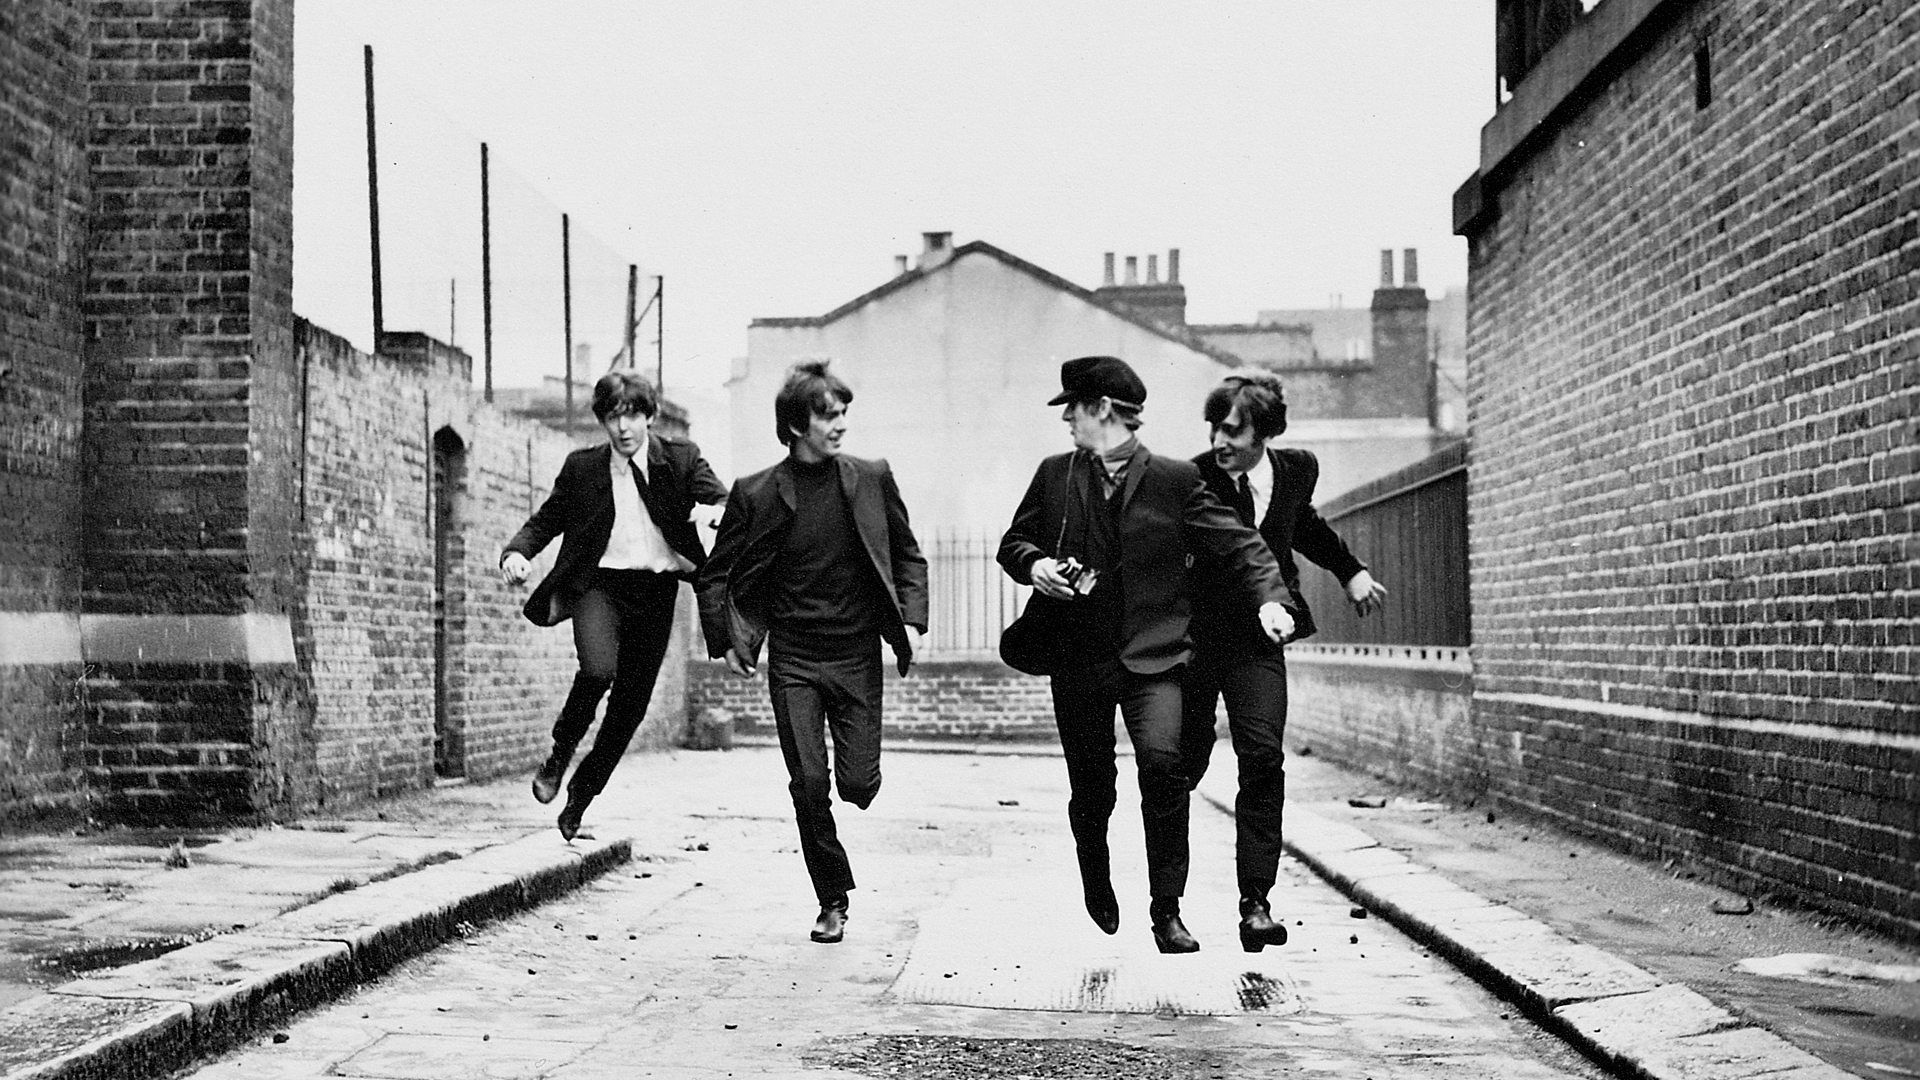 Film Discussion 22: A Hard Day's Night (1964)